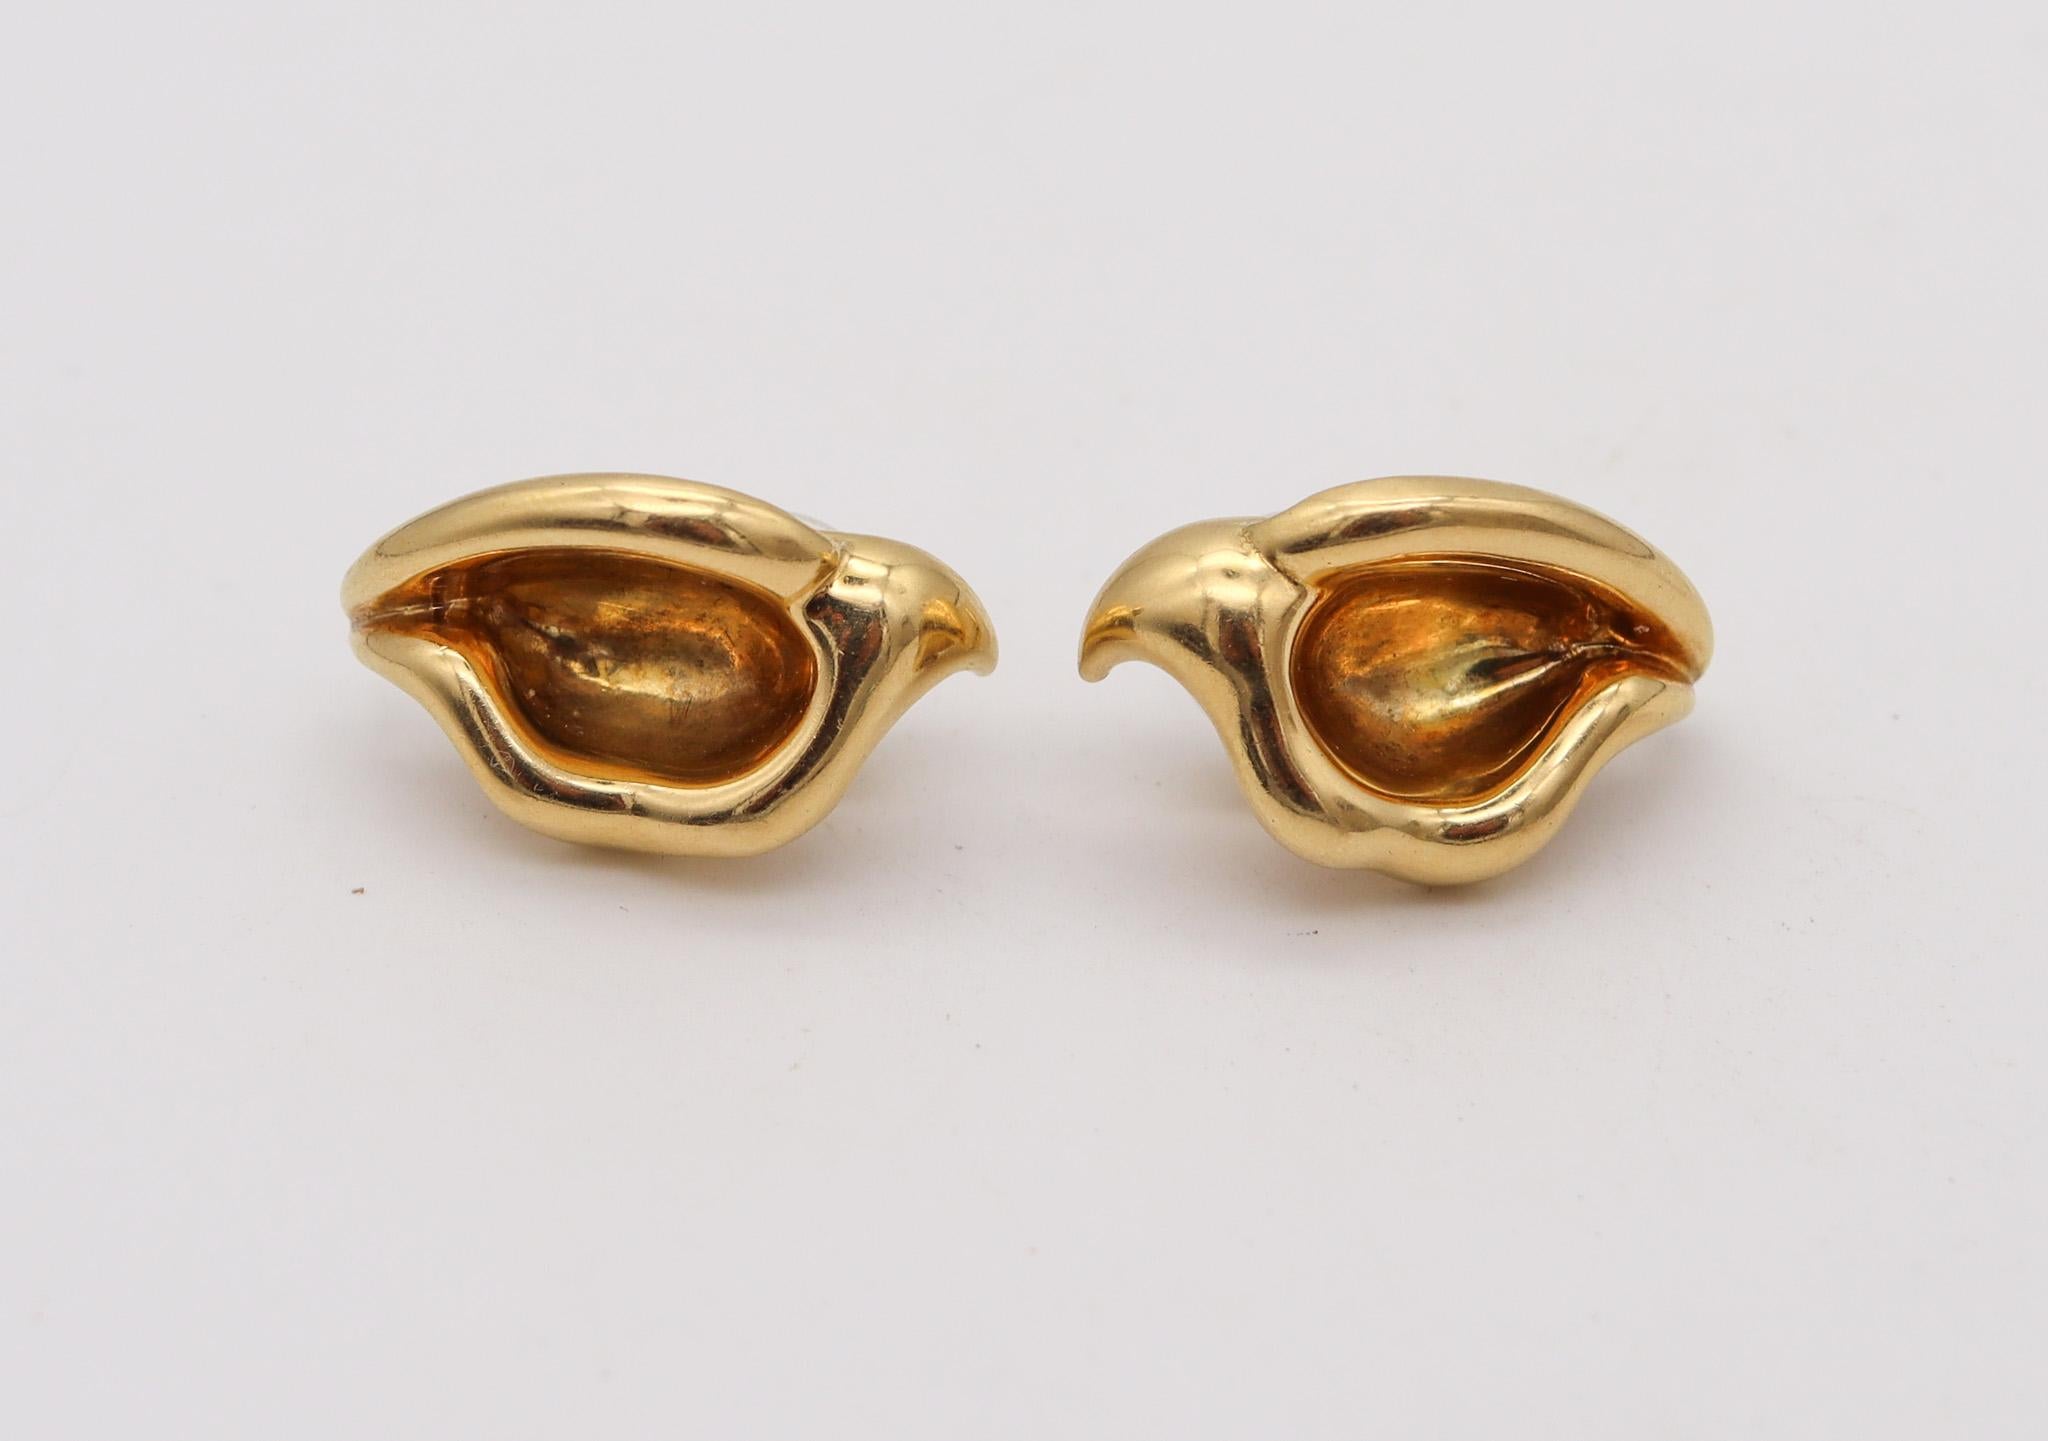 Calla Earrings designed by Elsa Peretti (1940-2021) for Tiffany & Co.

Fabulous sculptural pair of clips-on earrings designed by Elsa Peretti for Tiffany & Co. back in the 1977. These vintage earrings have been designed as a left and right in three